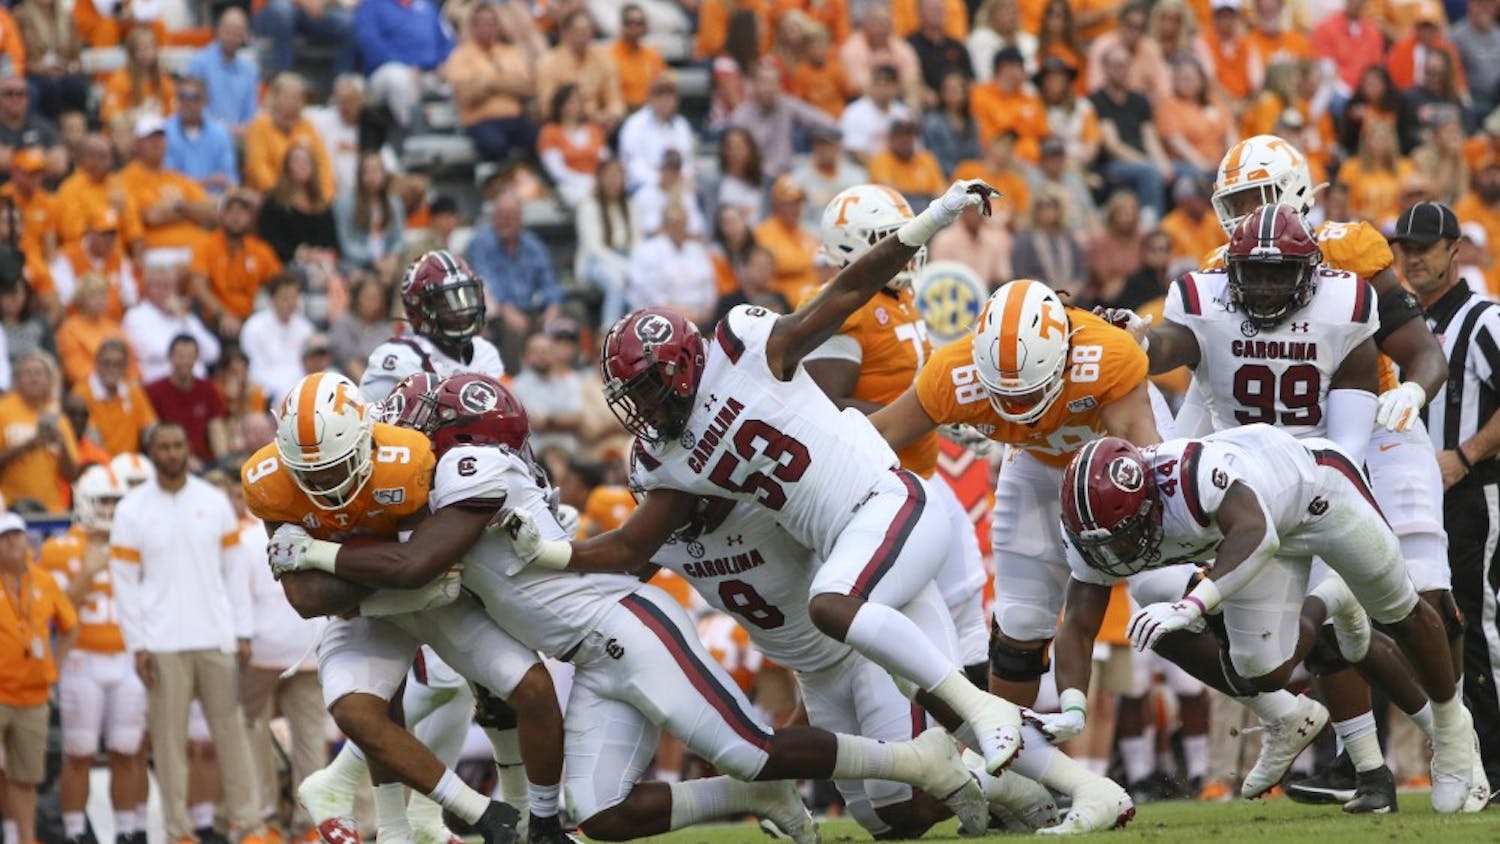 &nbsp;University of South Carolina football player tackles a University of Tennessee player Oct. 26, 2019. South Carolina lost 41-21.&nbsp;